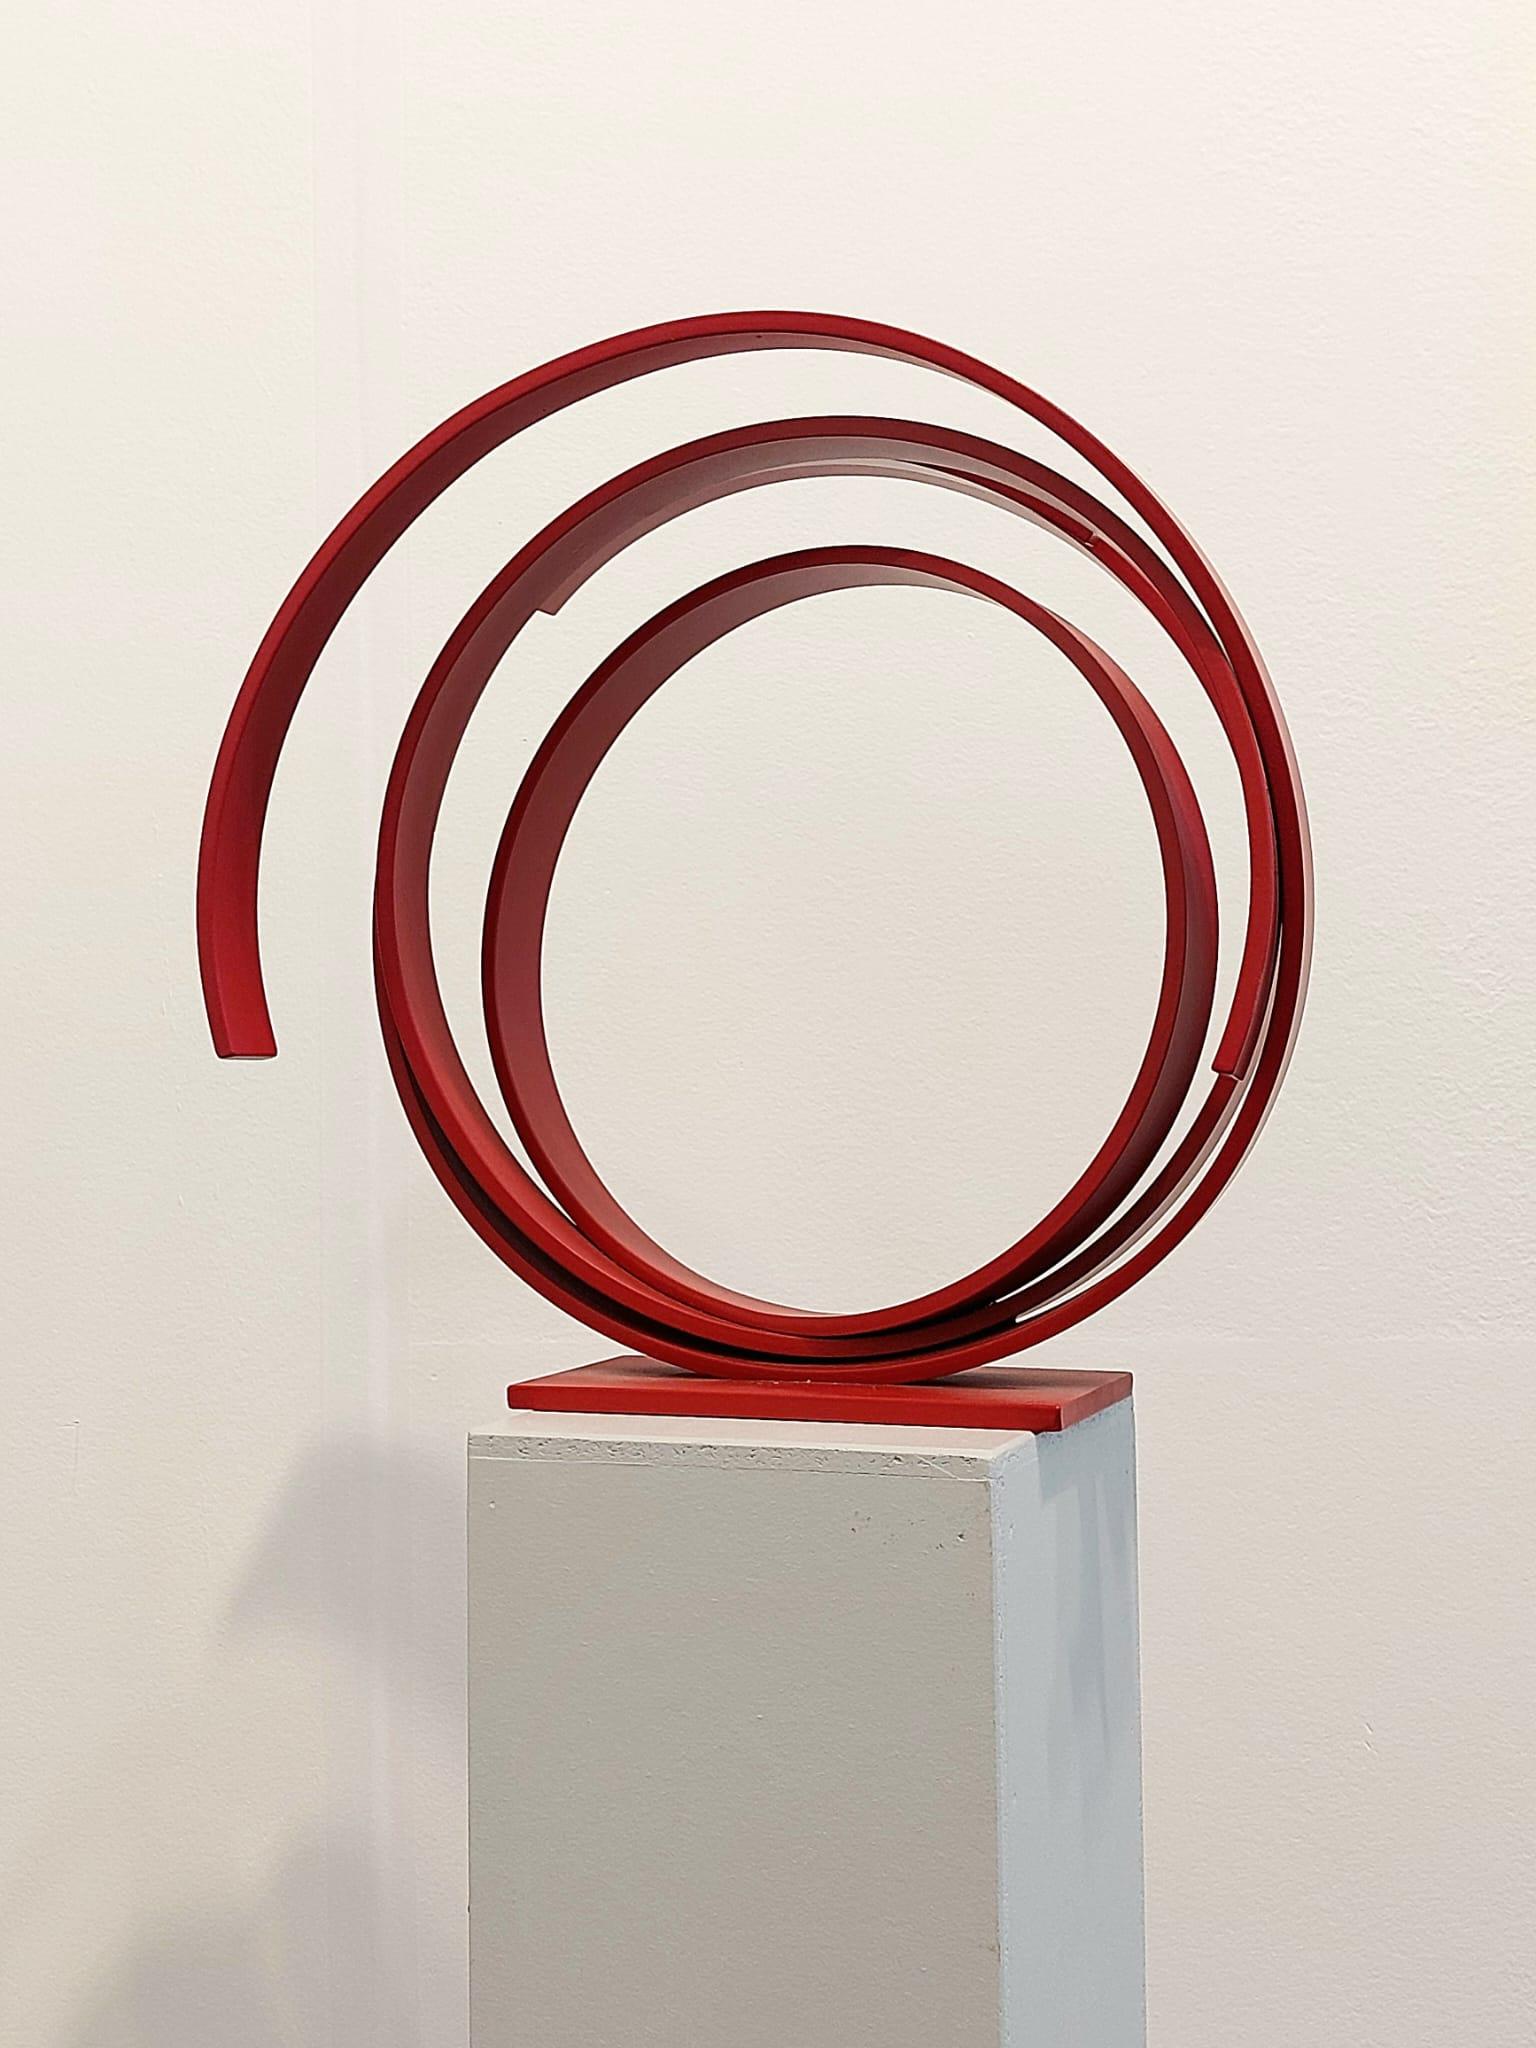 Small Red Orbit by Kuno Vollet - Large Contemporary Round Orbit sculpture  For Sale 6